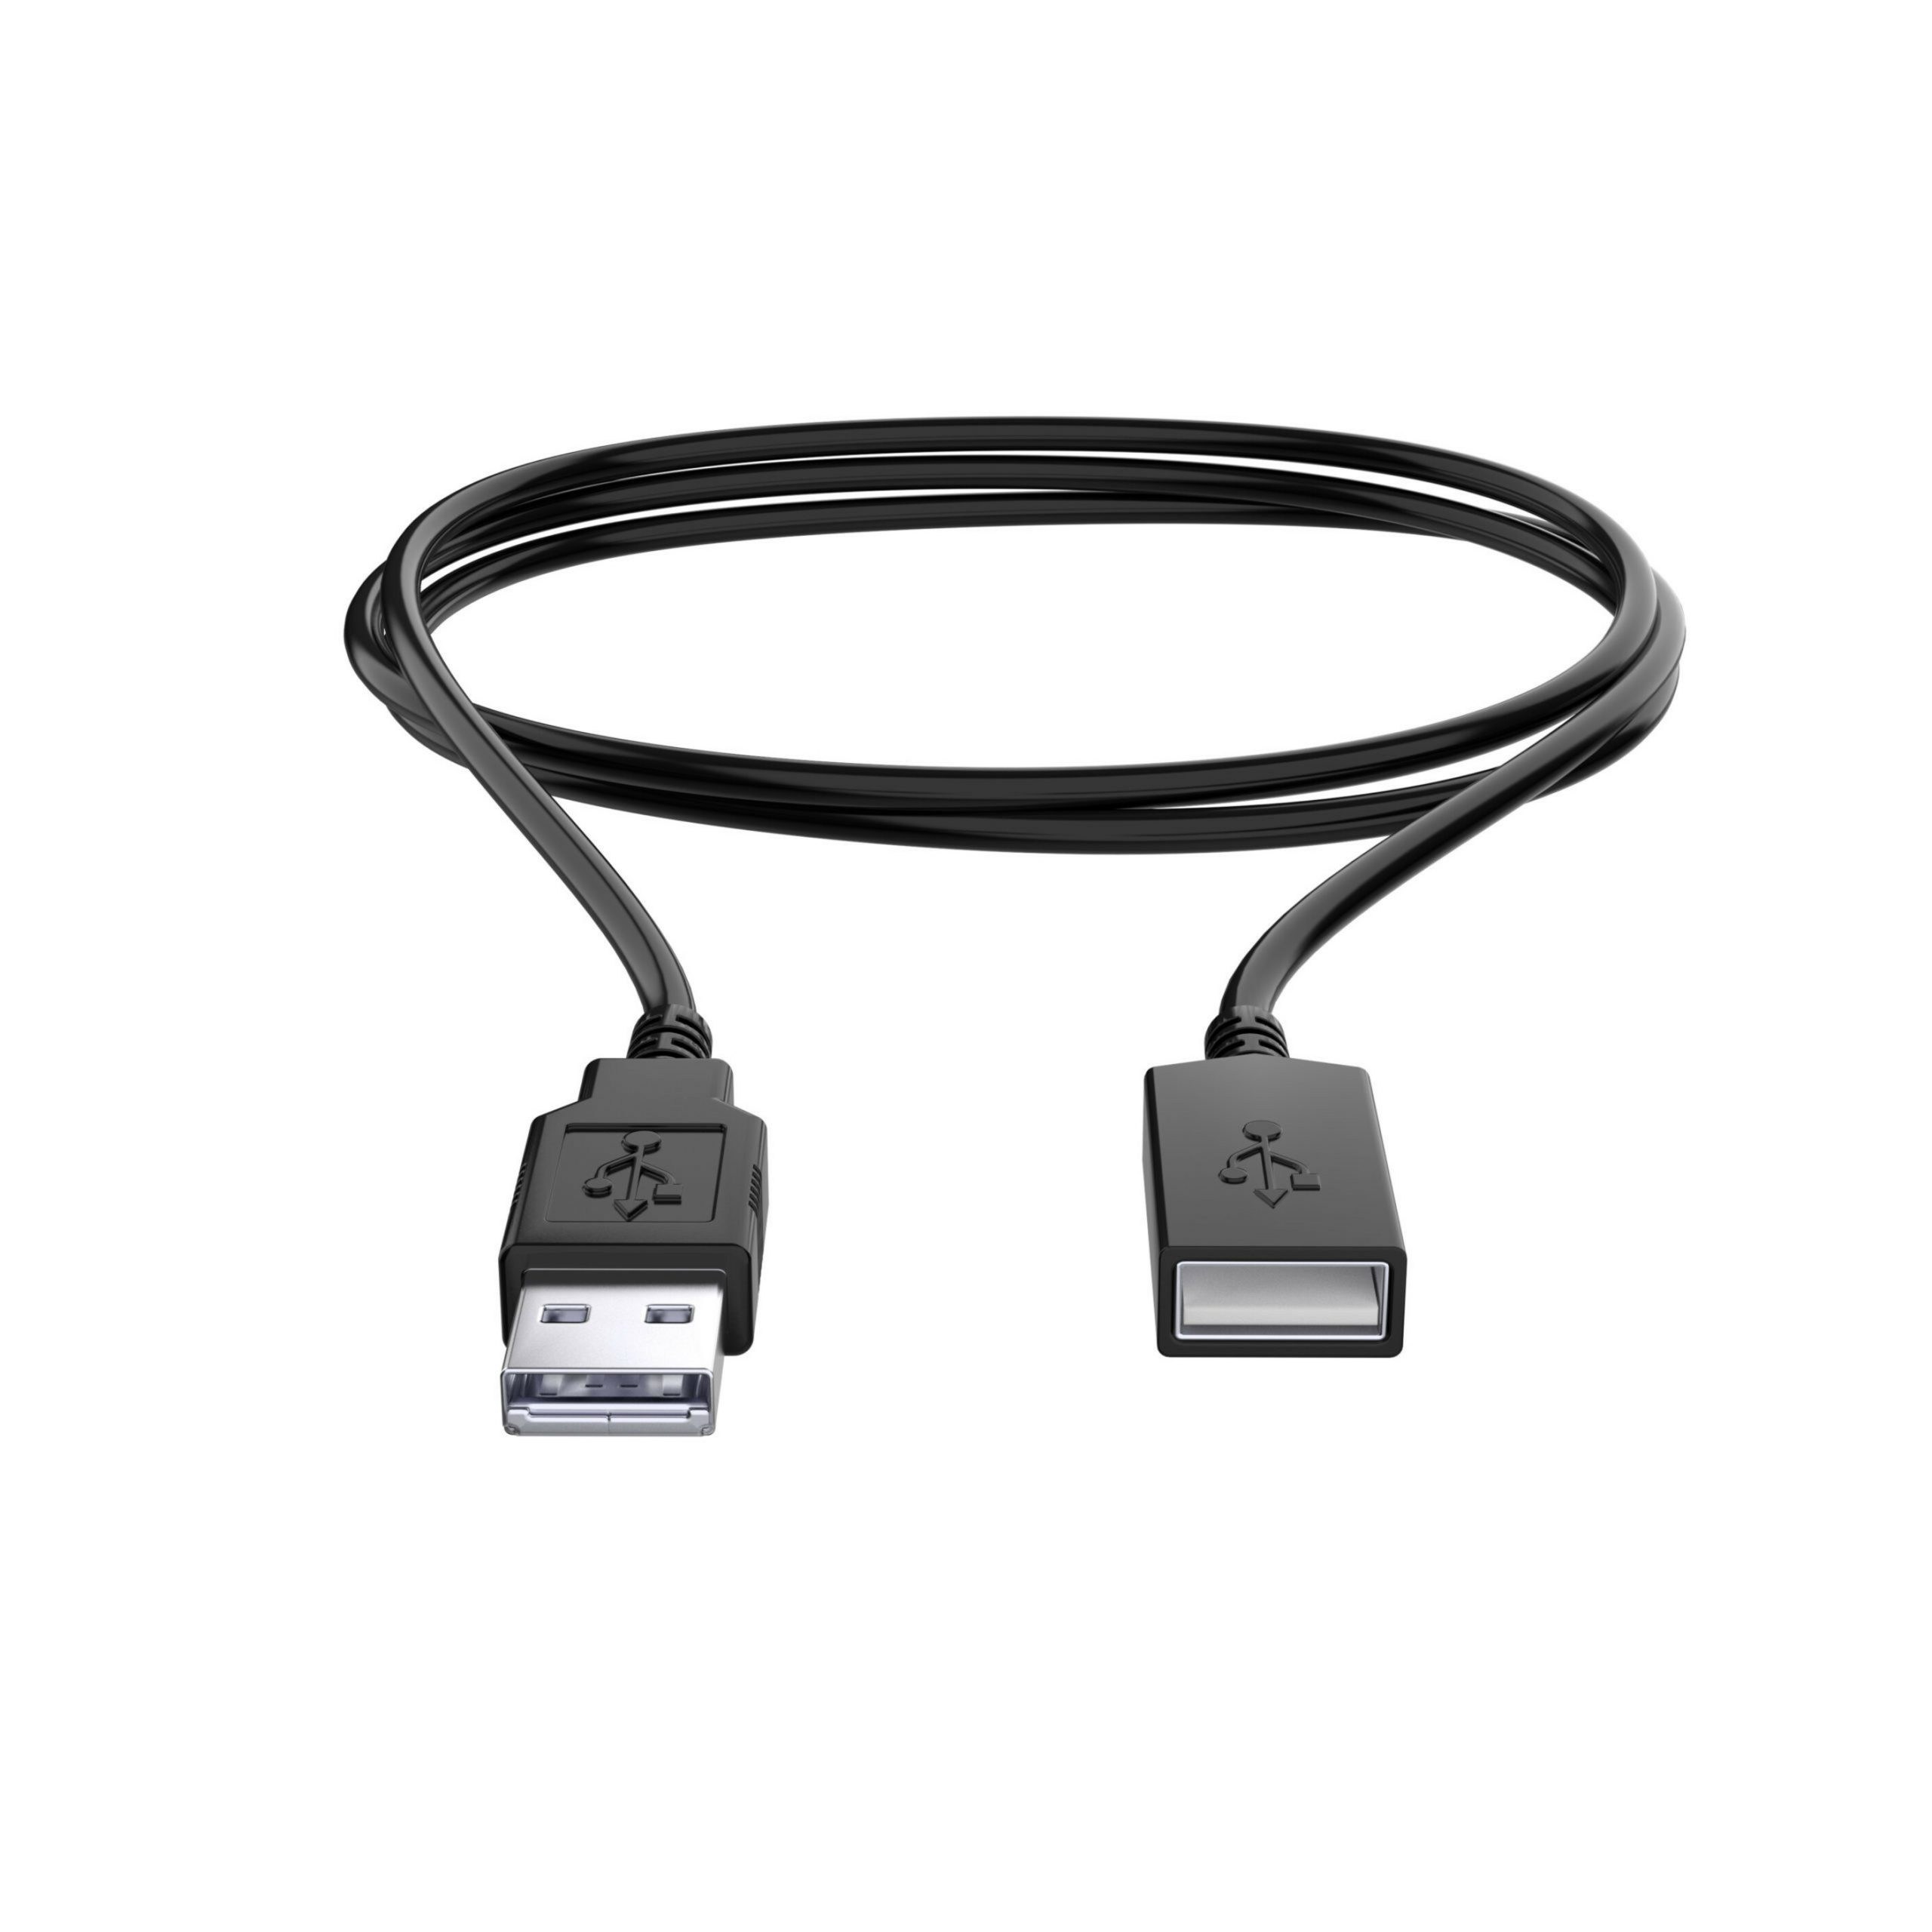 Cta Digital Accessories 6-Foot Male to Female USB 2.0 Cable (Black)6 ft USB Data Transfer Cable for MAC, PCFirst End: 1 x USB 2.0 Type AMaleSec… ADD-USBB